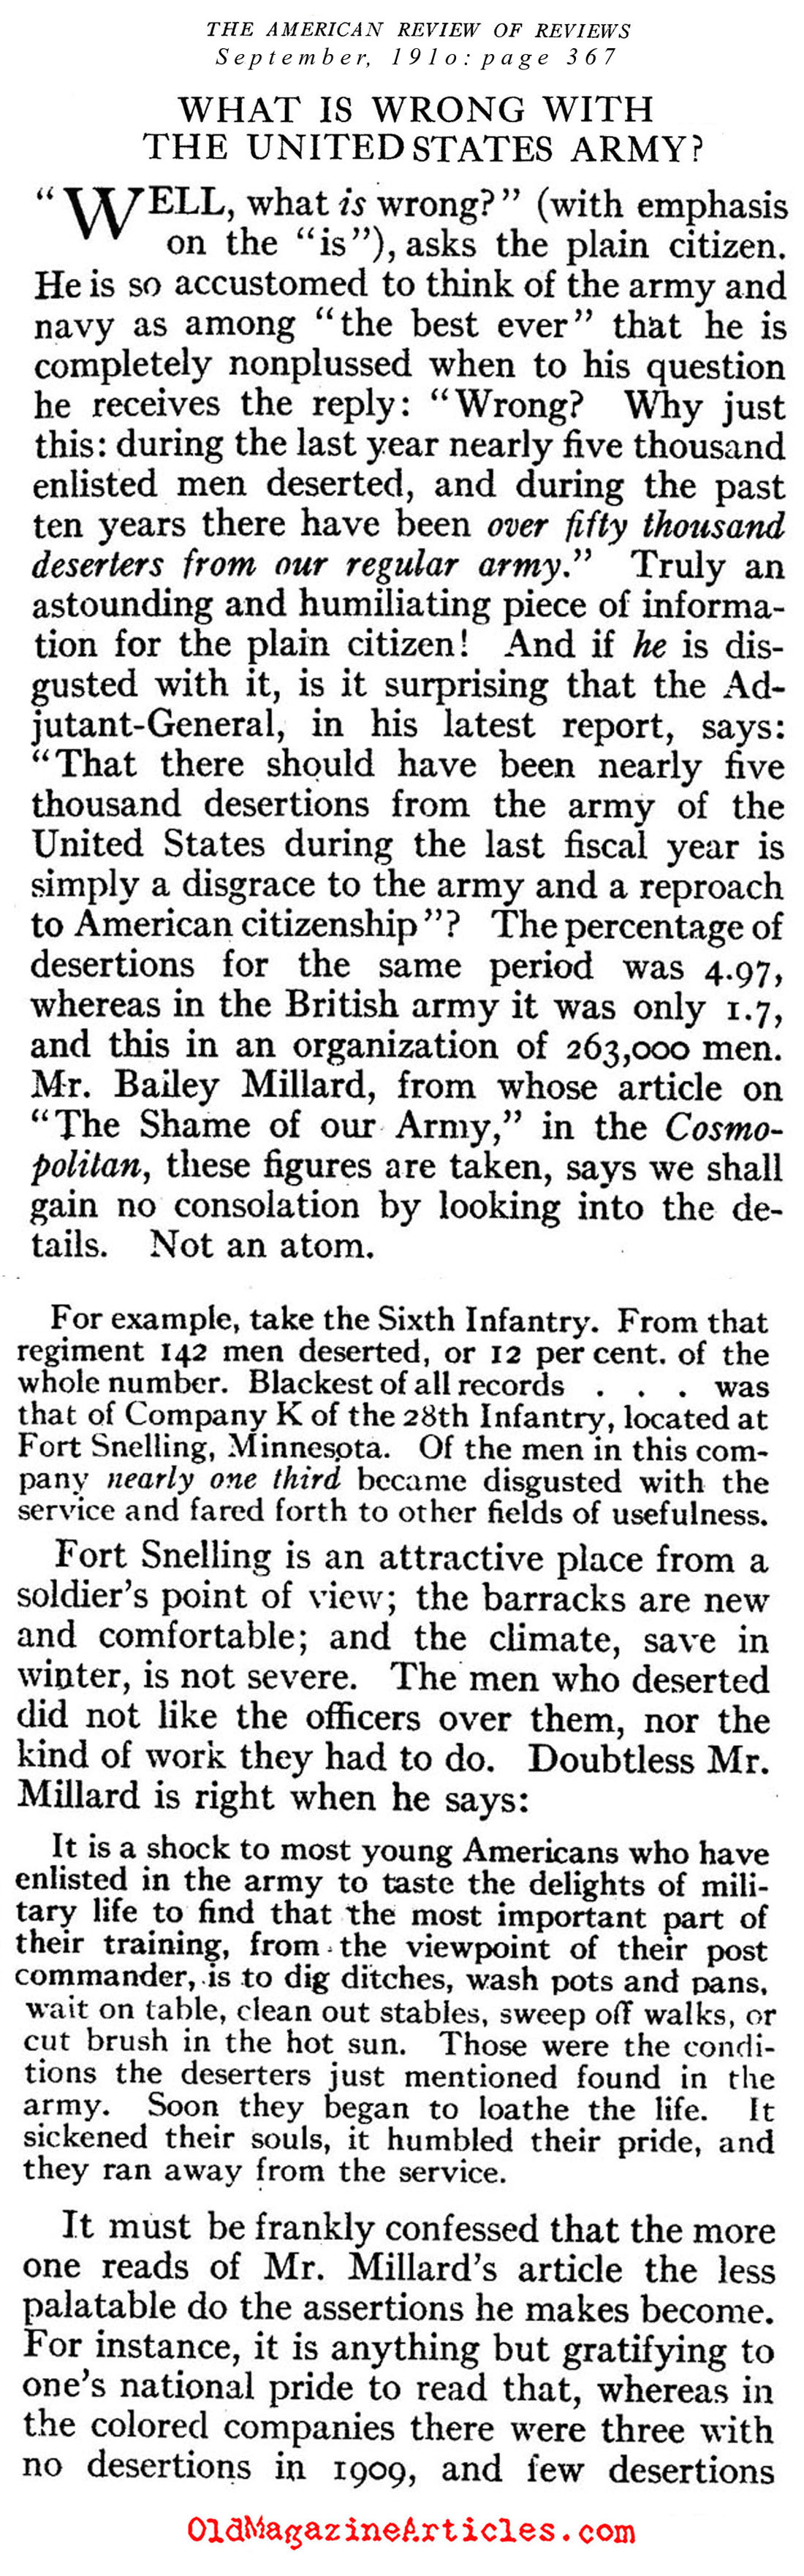 The U.S. Army: Plagued by Deserters   (Review of Reviews, 1910)